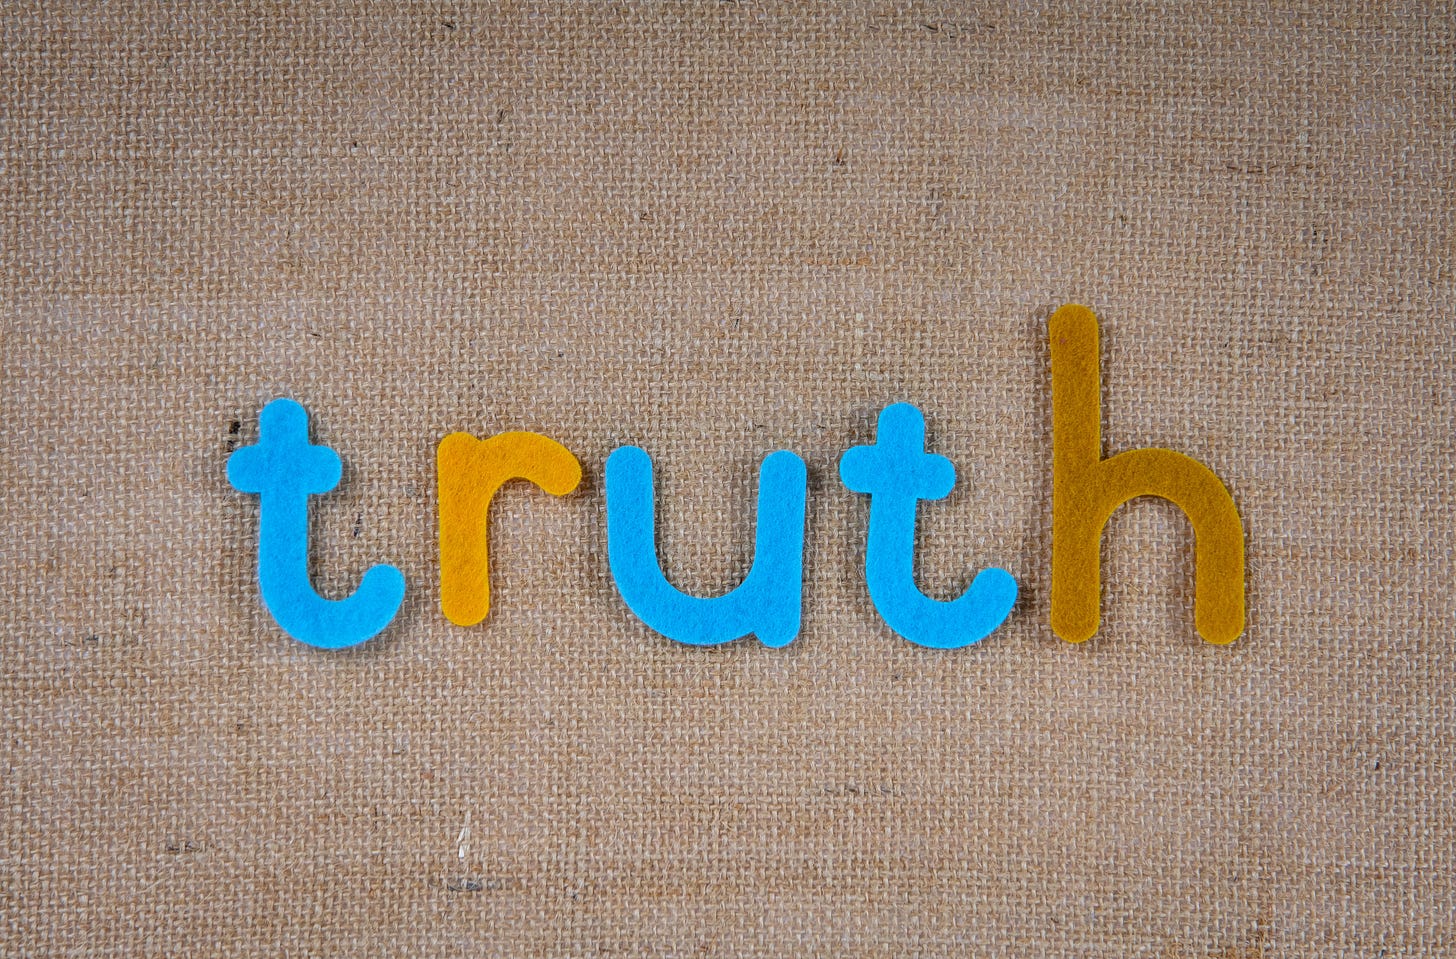 the word "truth" in letters cut out of fabric against a canvas background